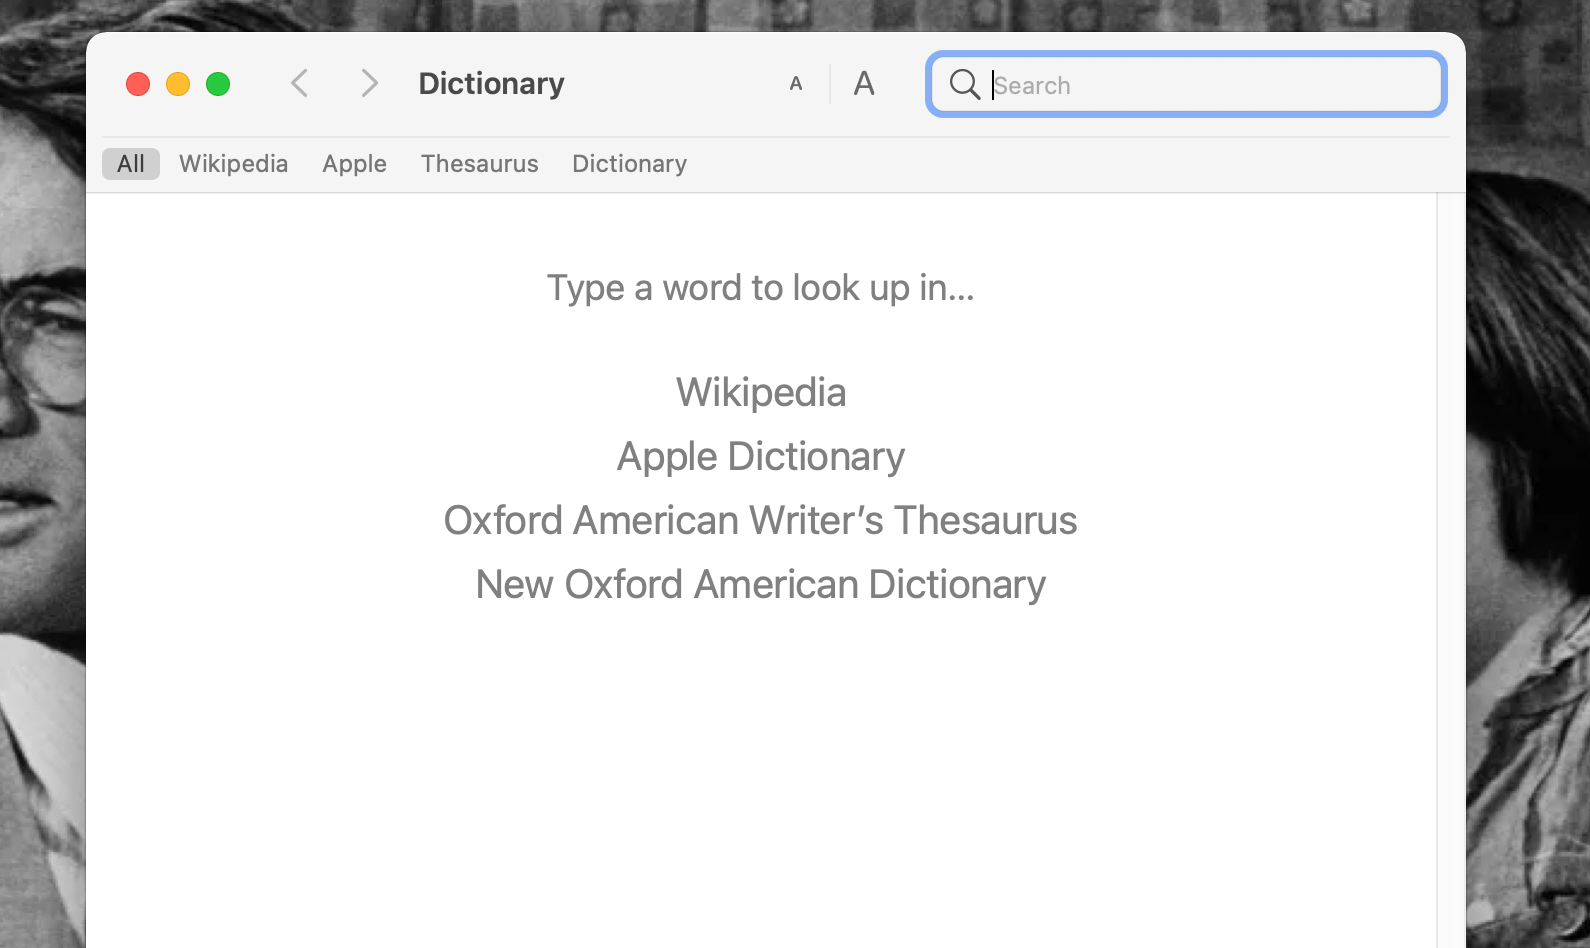 Dictionary app open on a MacBook Pro with default dictionaries and reference sources visible